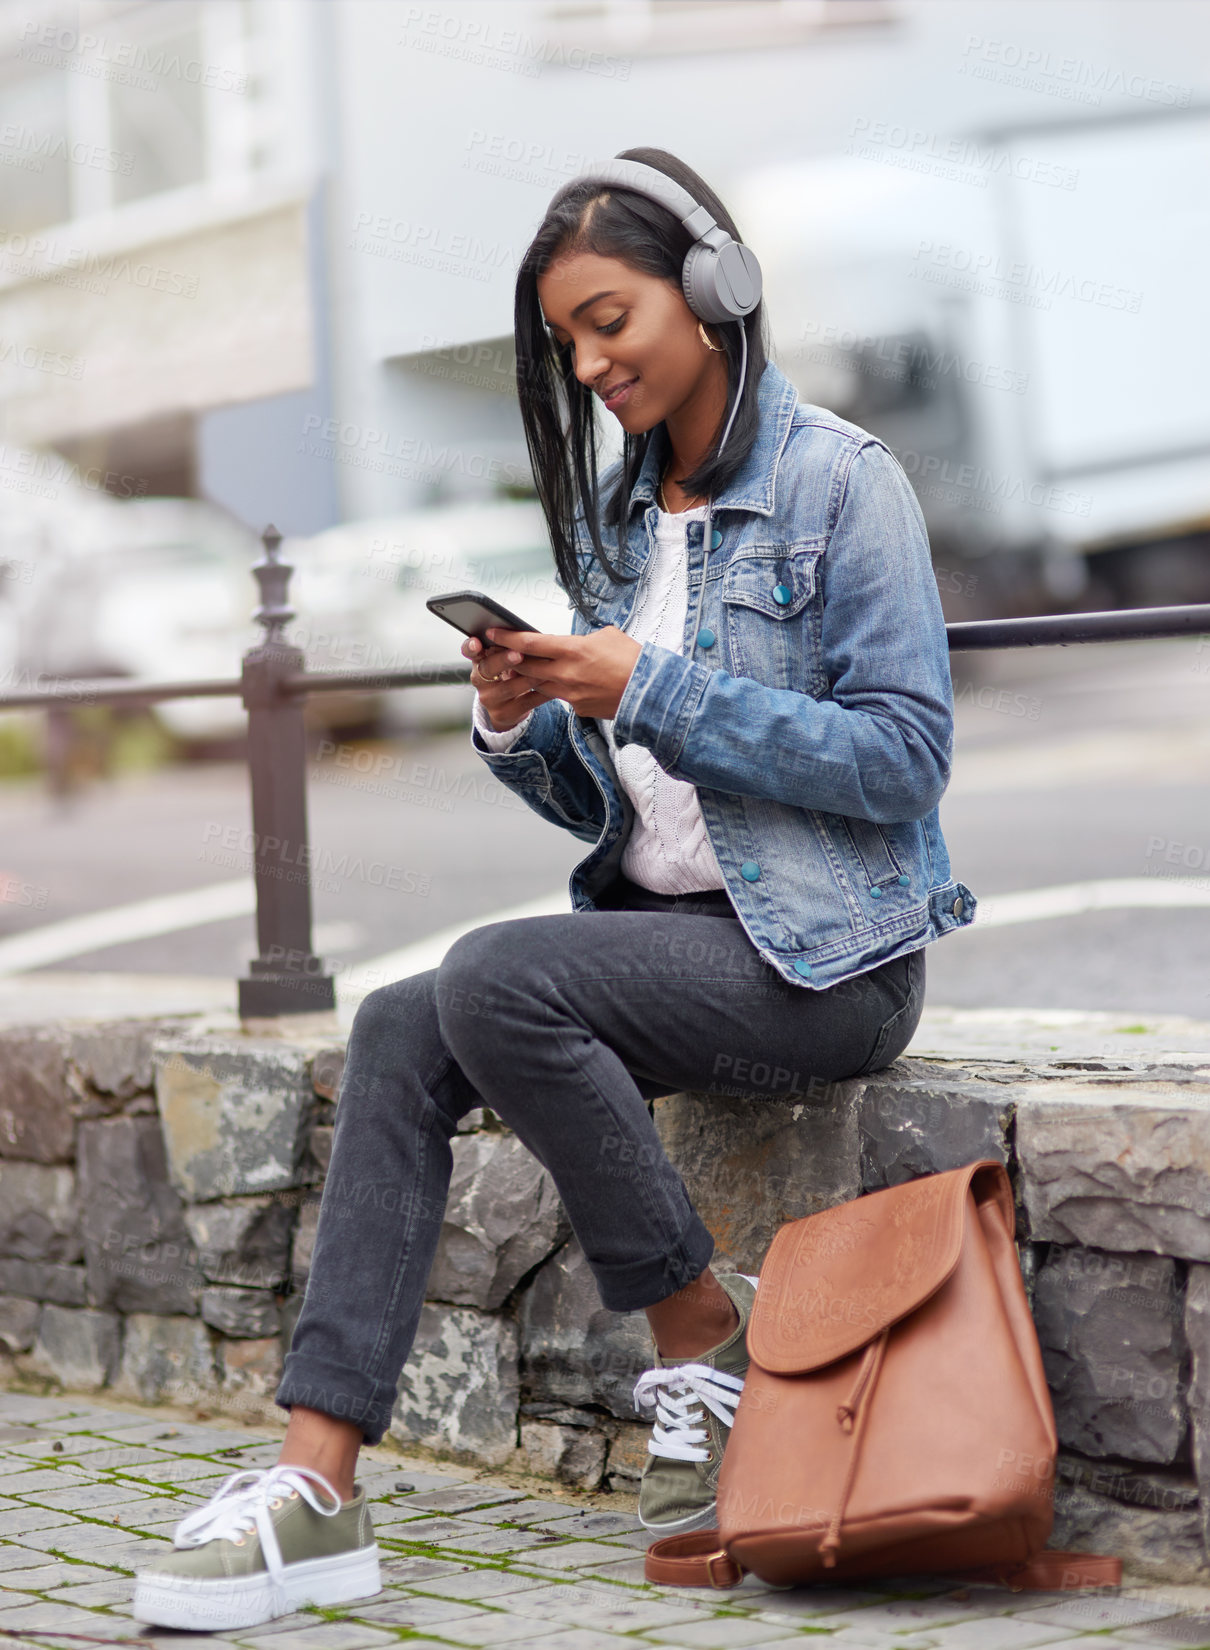 Buy stock photo Shot of a young woman wearing headphones while using her cellphone out in the city